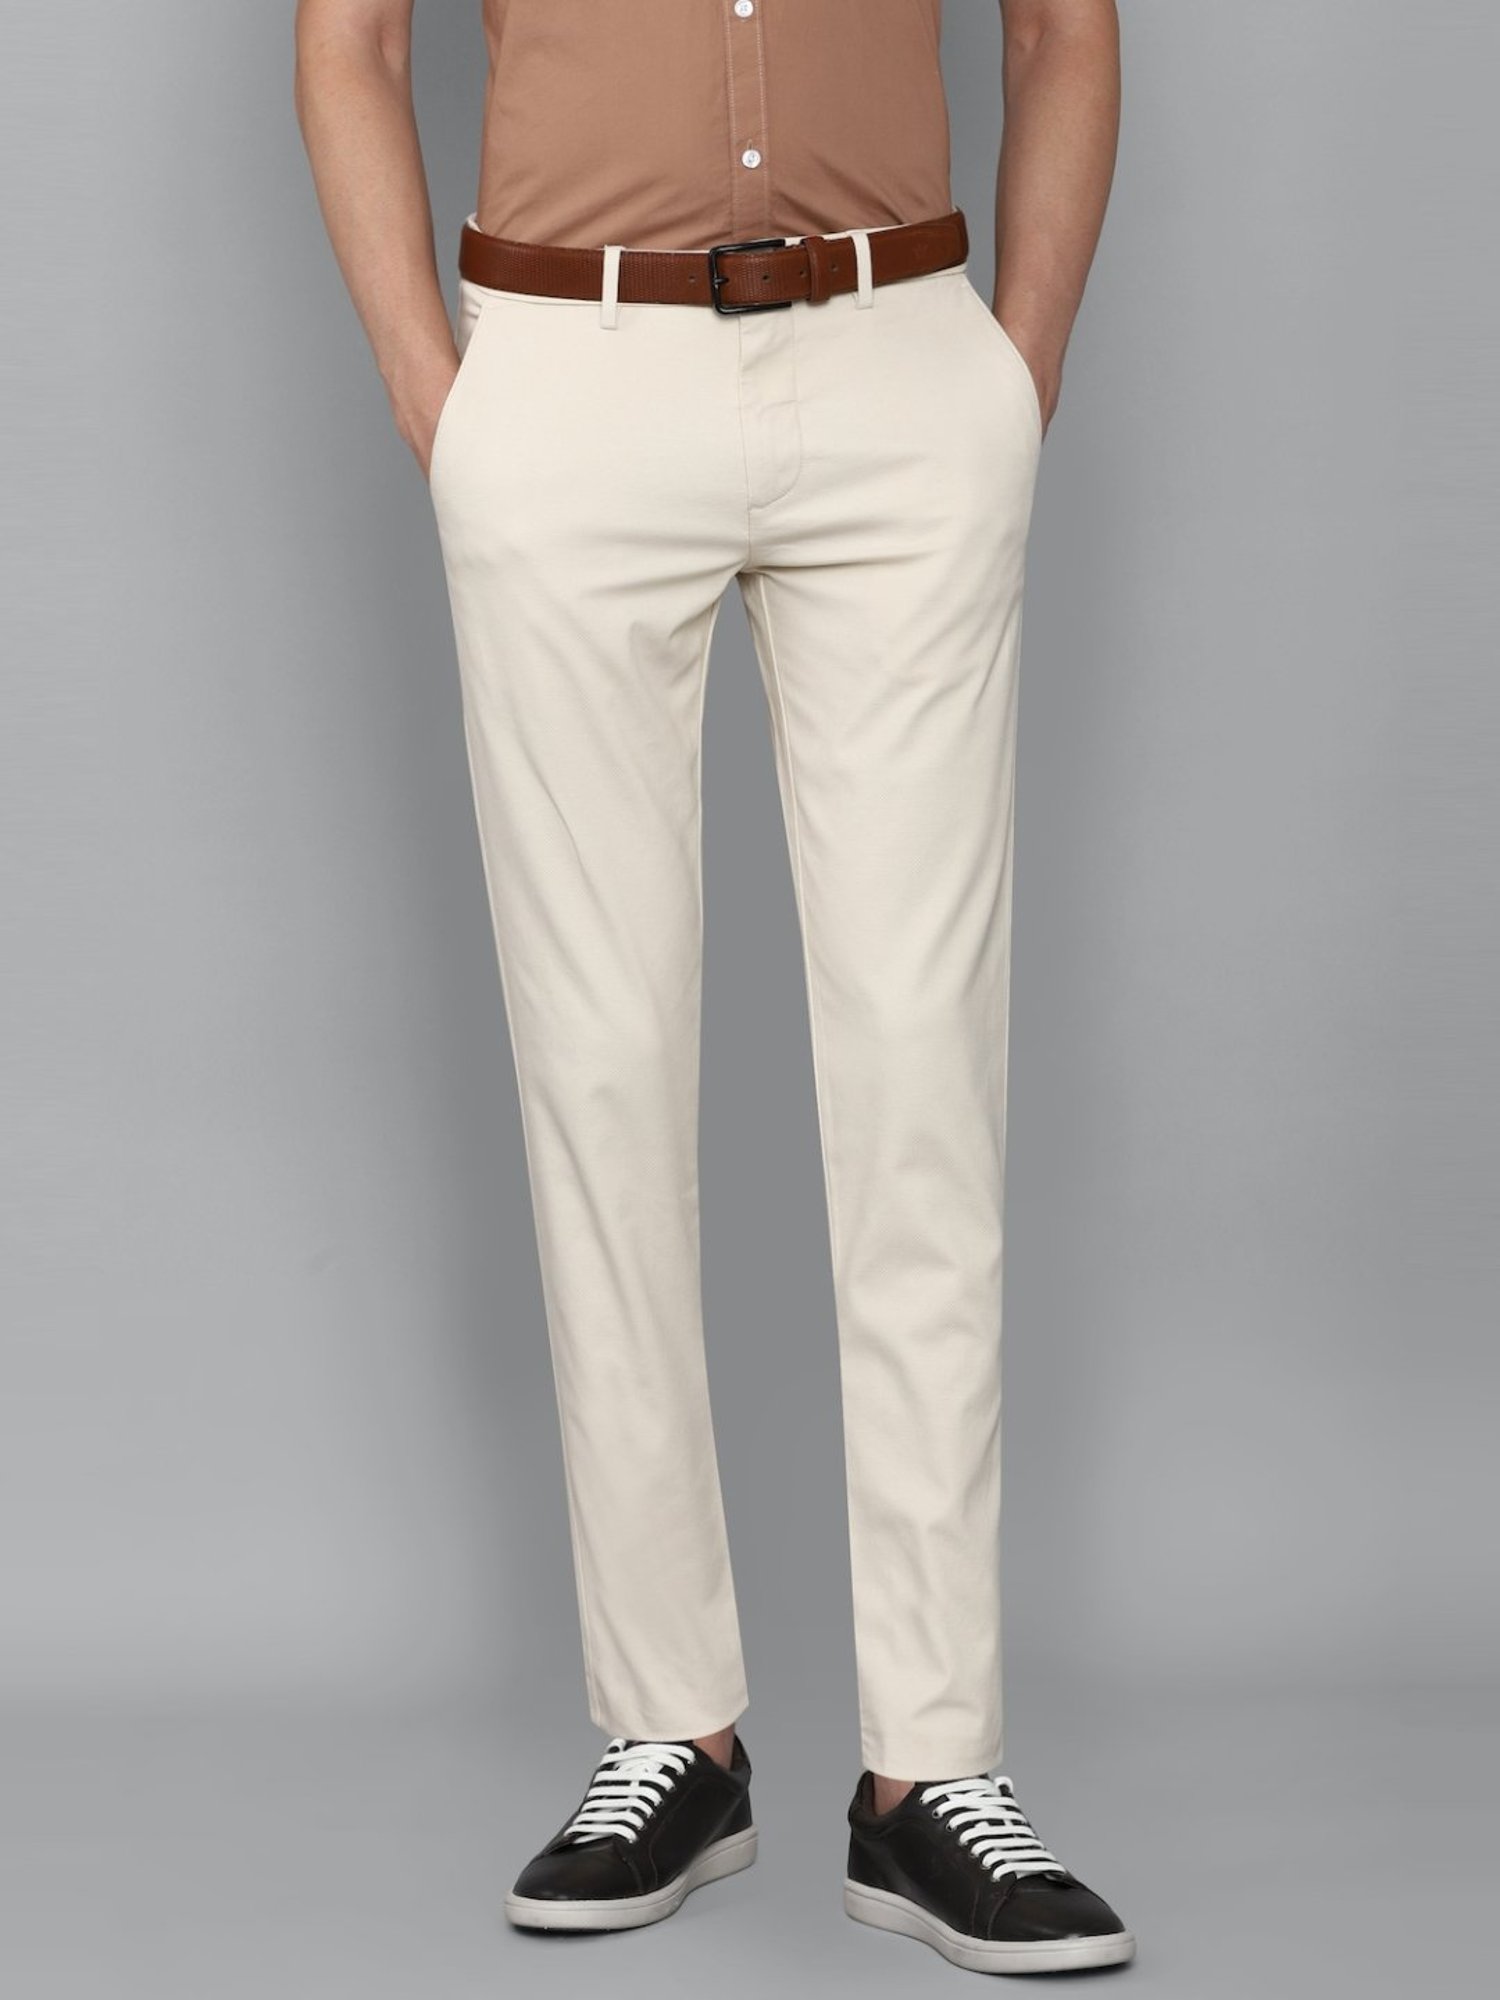 Buy Louis Philippe Black Trousers Online  708115  Louis Philippe